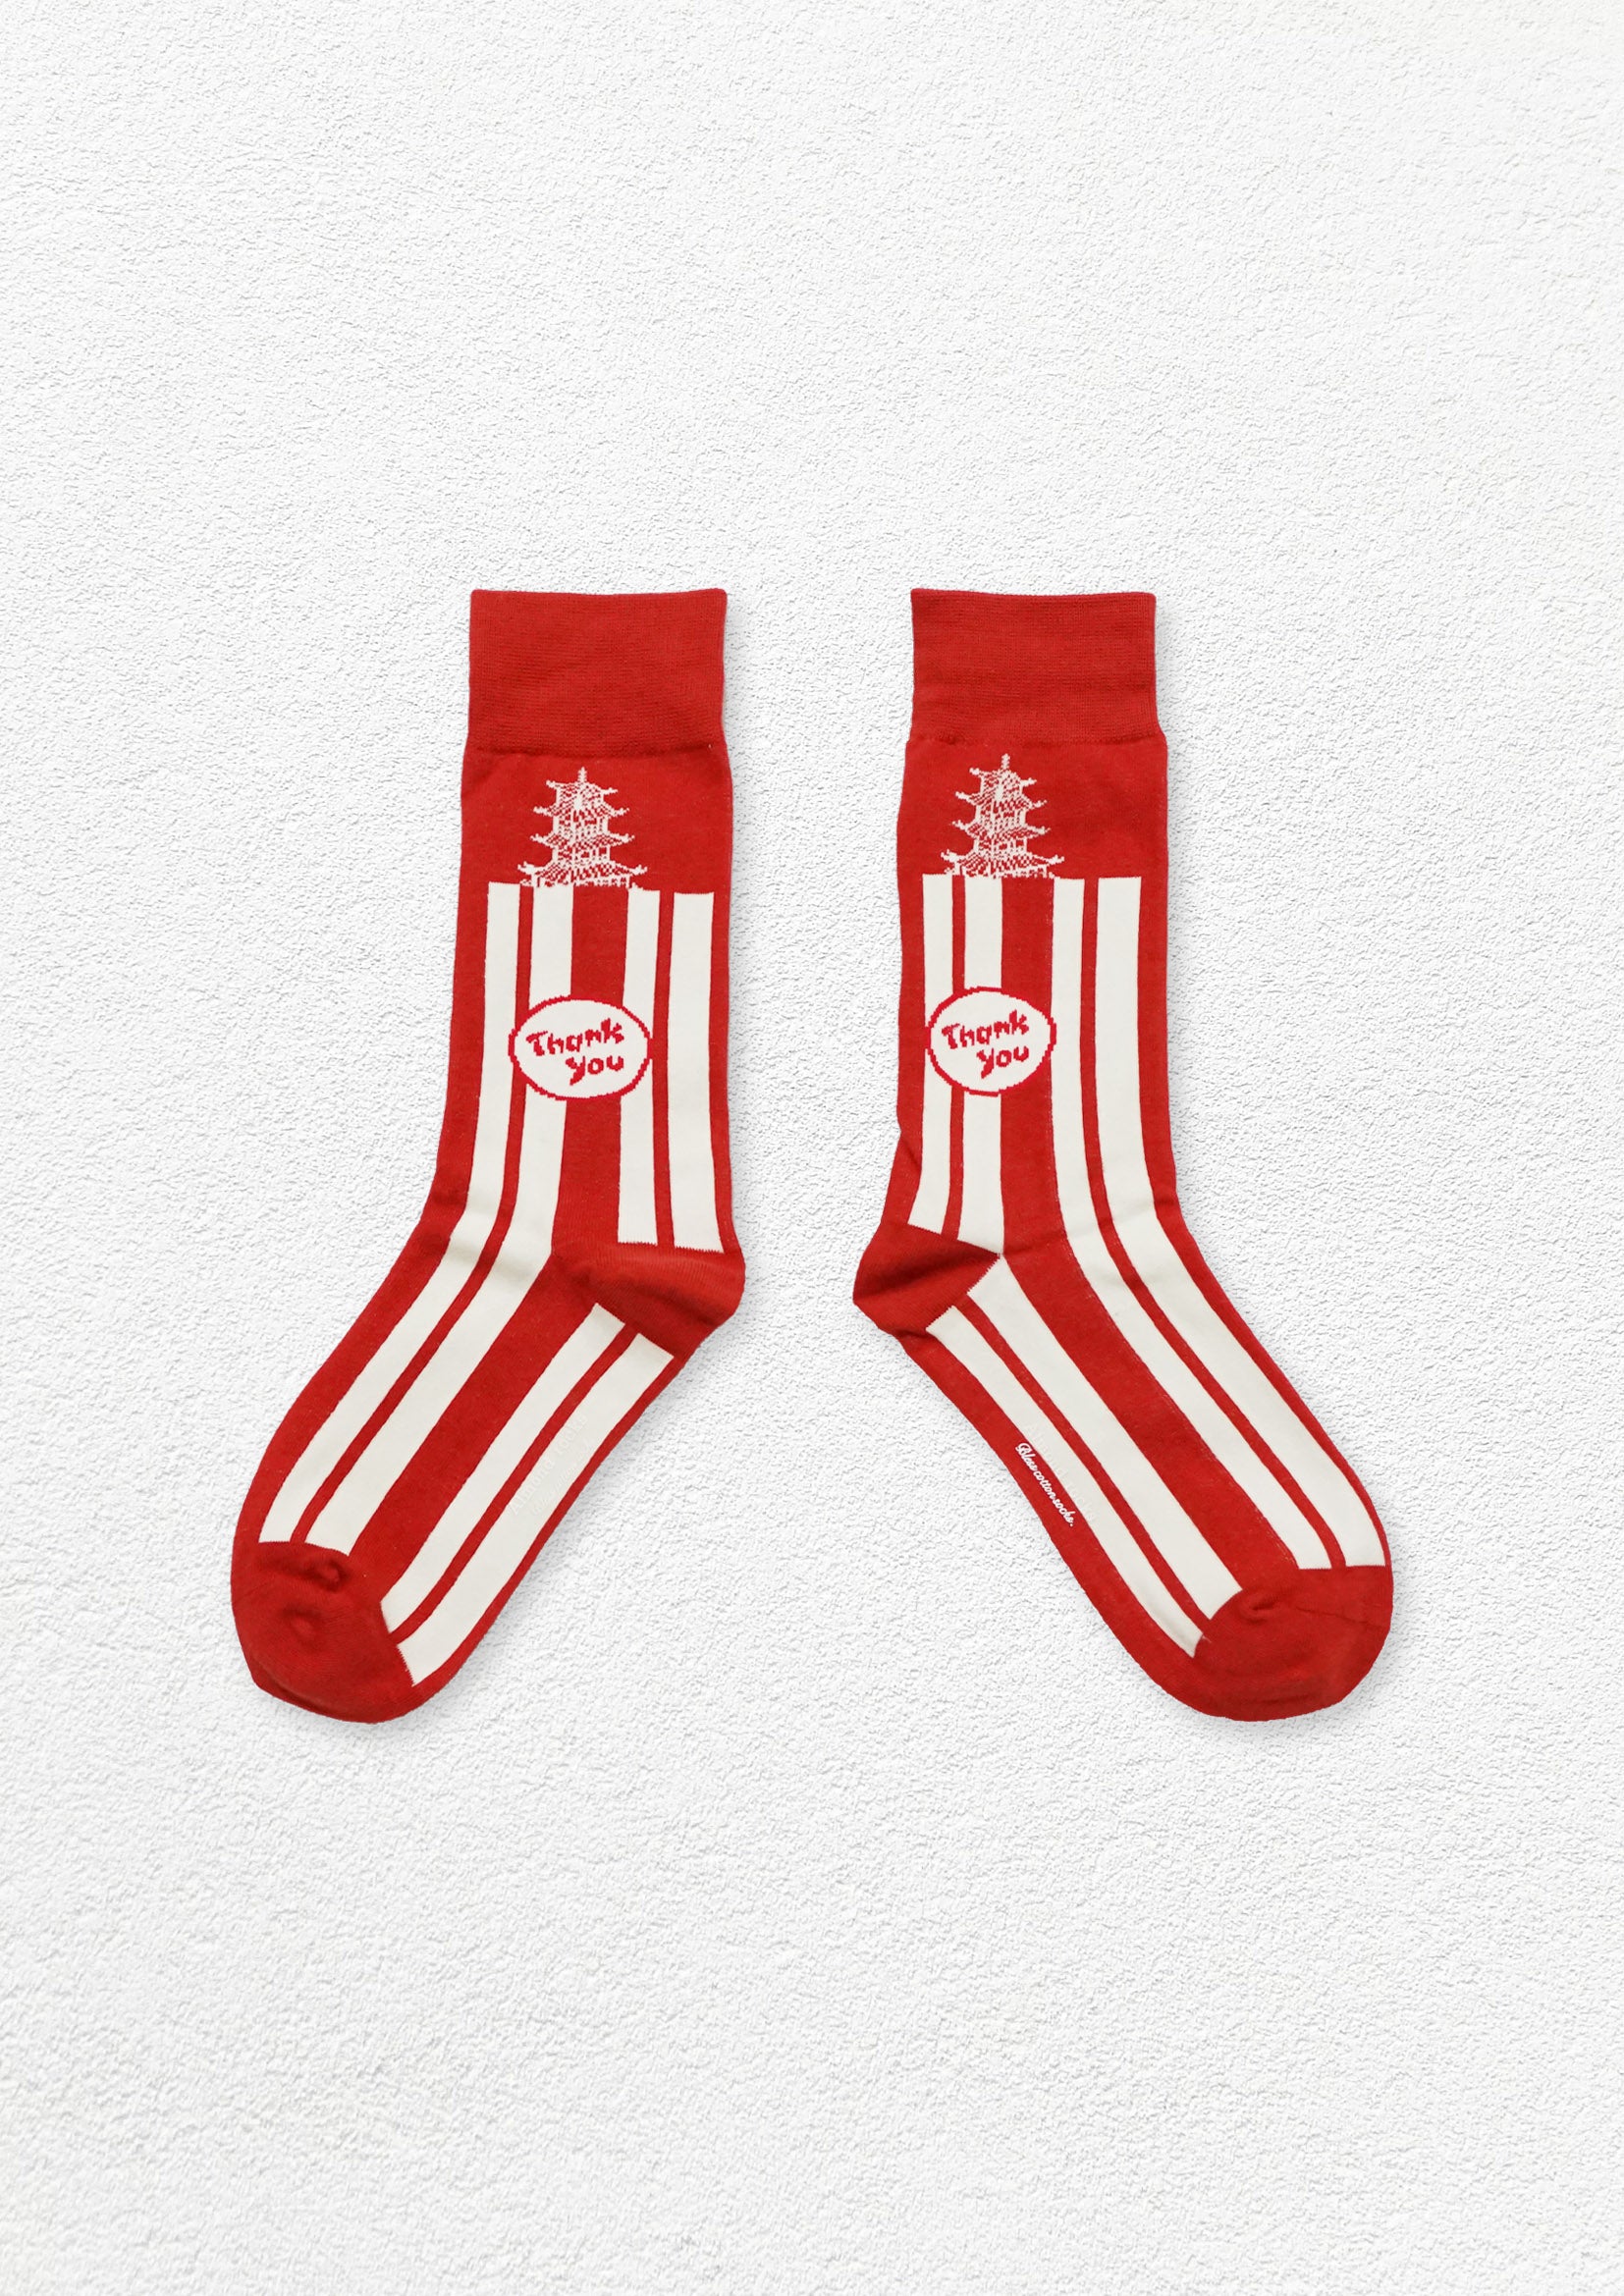 'Thank you' Chinese takeaway mid-calf sock - red